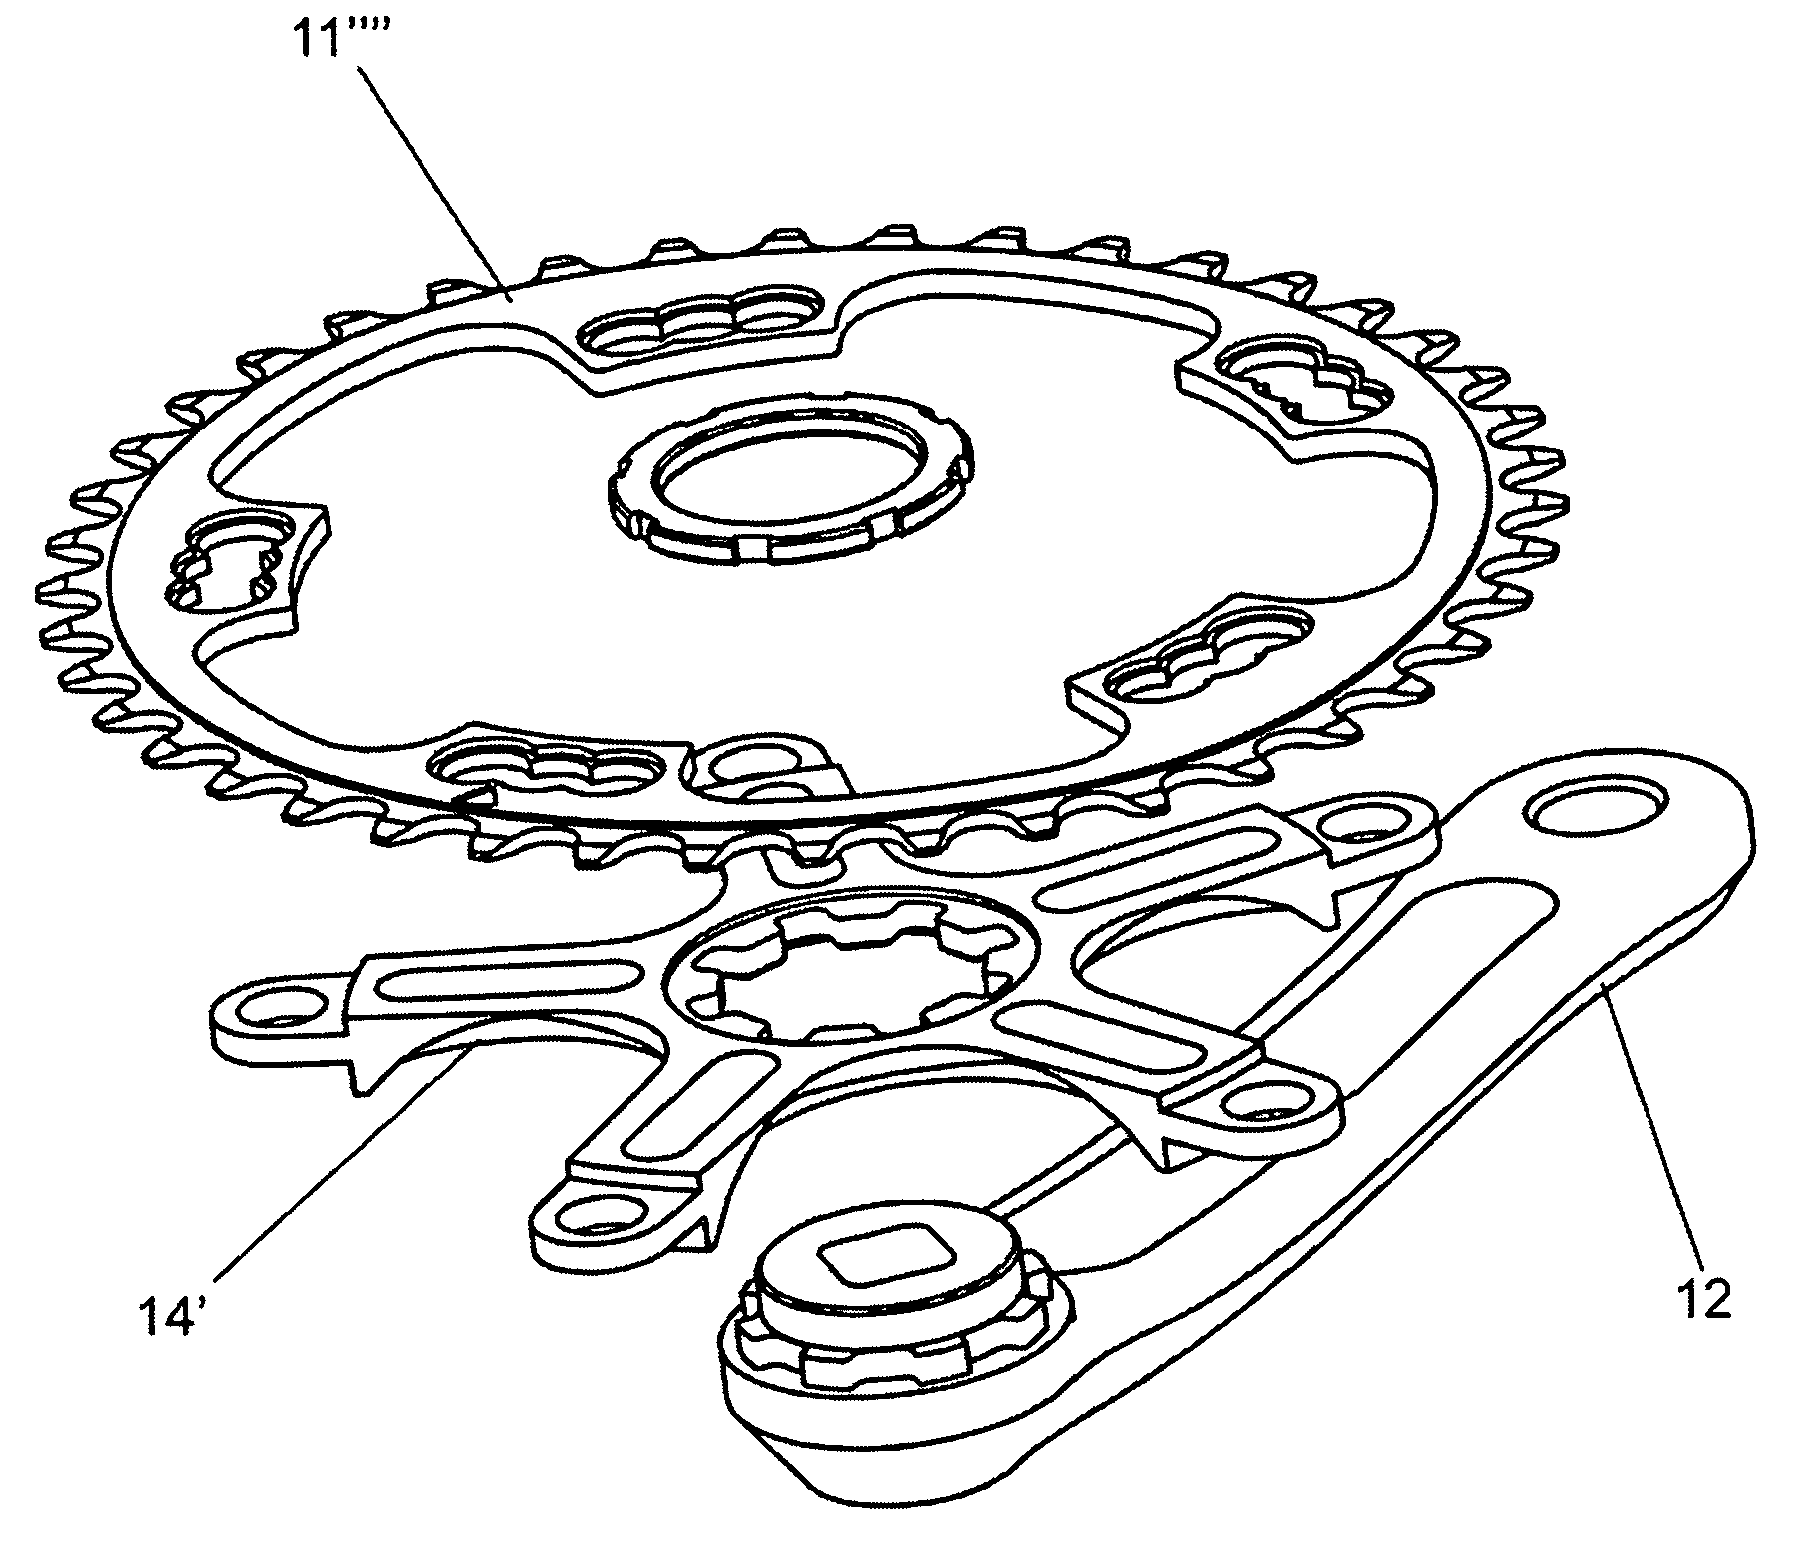 Ovoid chainrings for optimising conventional pedaling